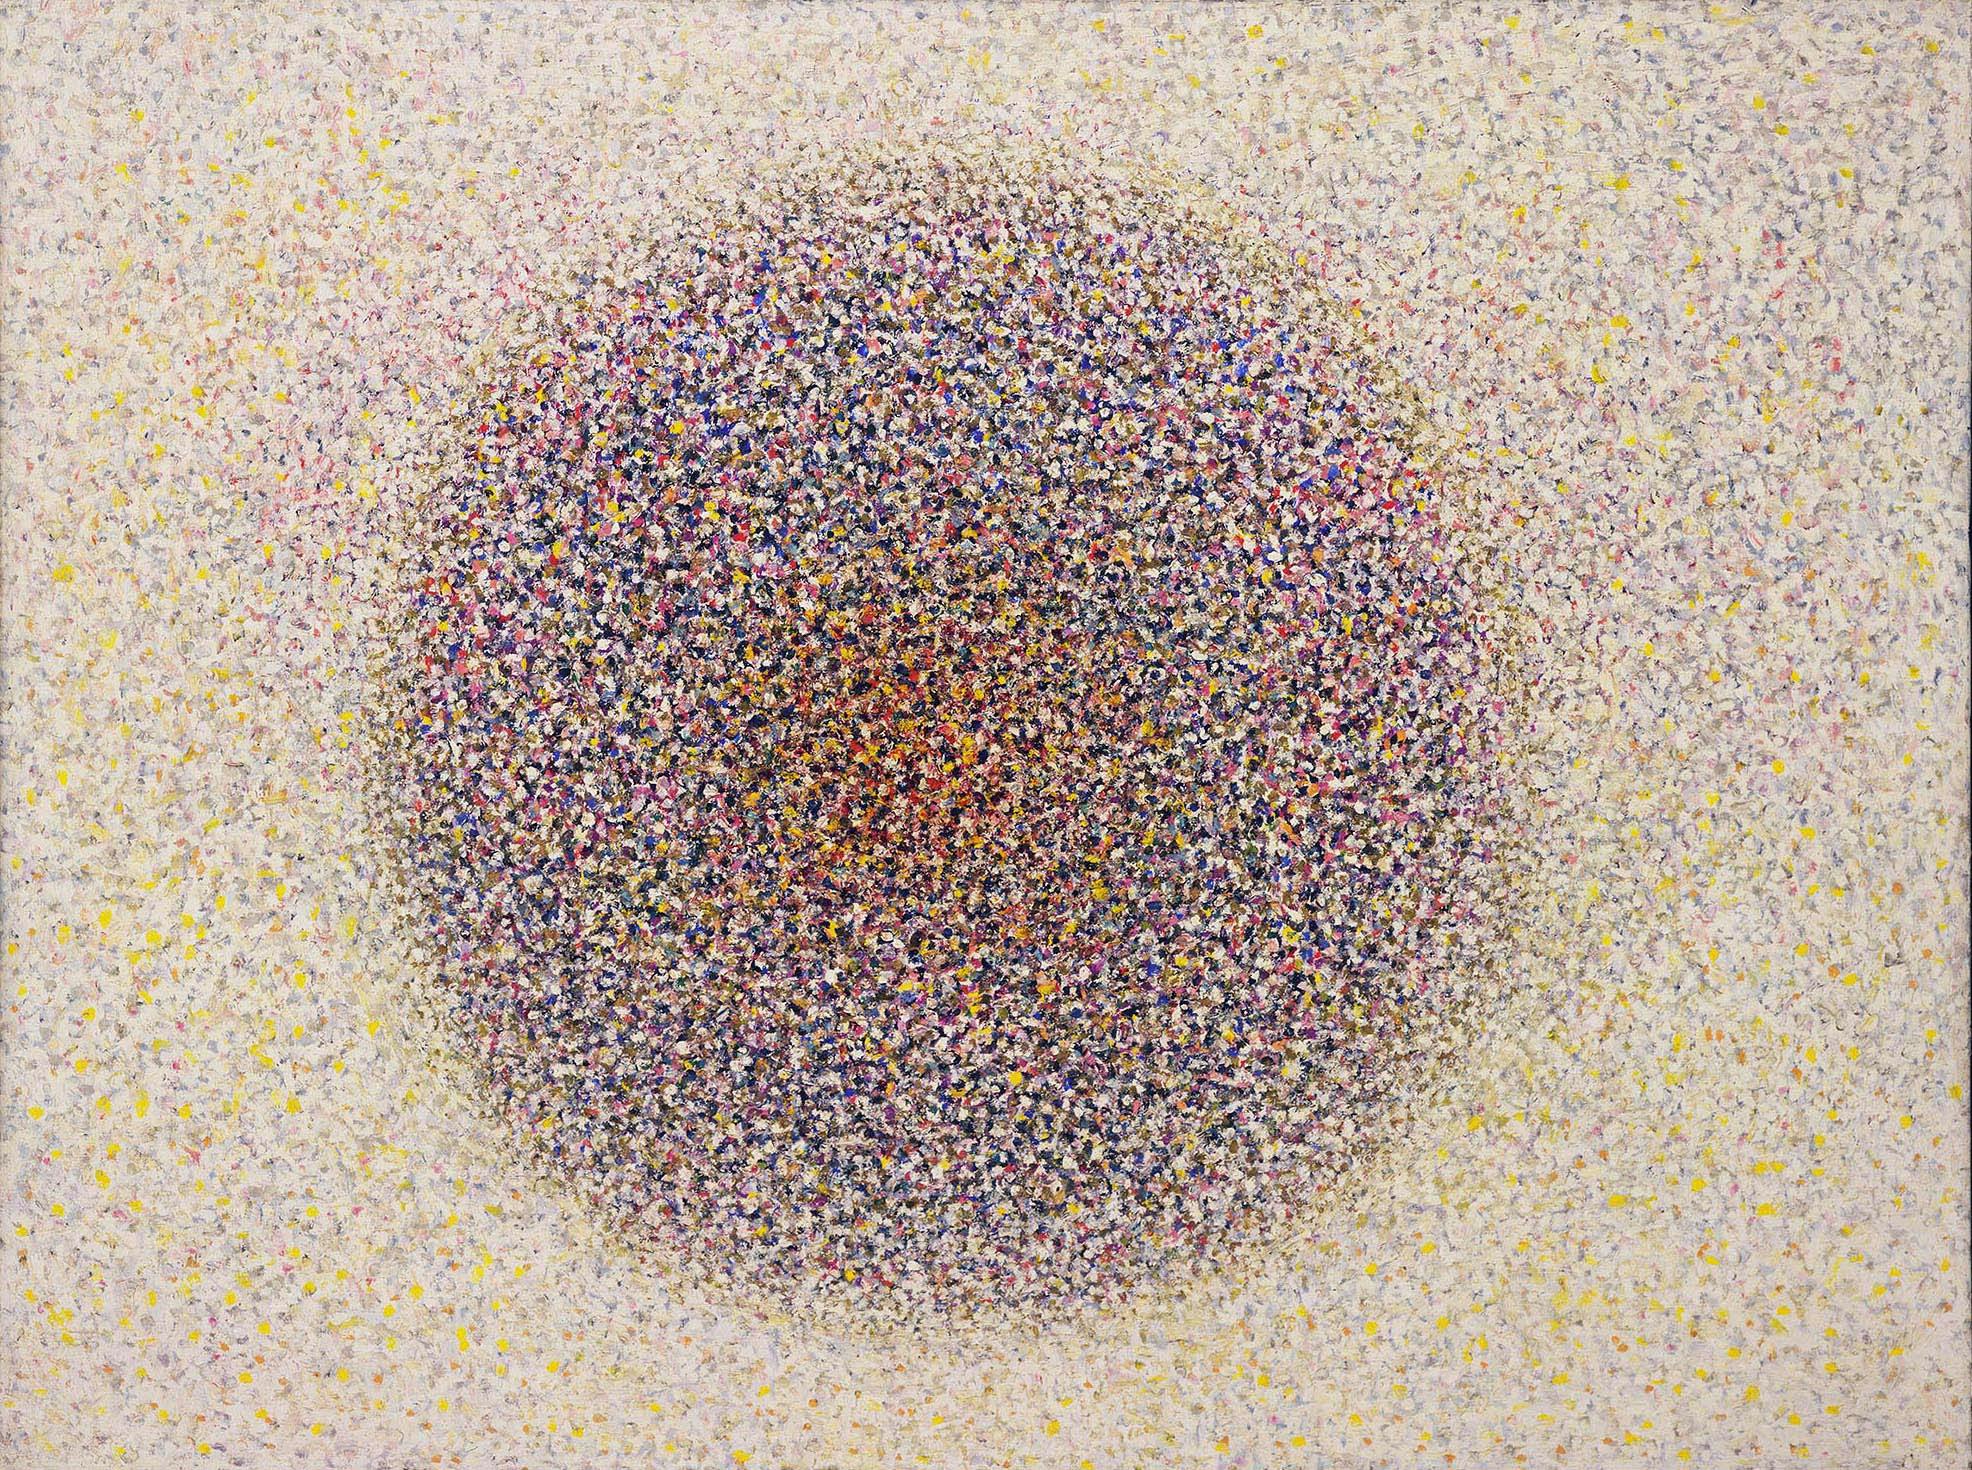 Radiance
1962–63
Oil and metallic paint on canvas
72 3/16 x 96 5/16 in. (183.3 x 244.4 cm)
The Museum of Modern Art, New York, Gift of Susan Morse Hilles
 – The Richard Pousette-Dart Foundation